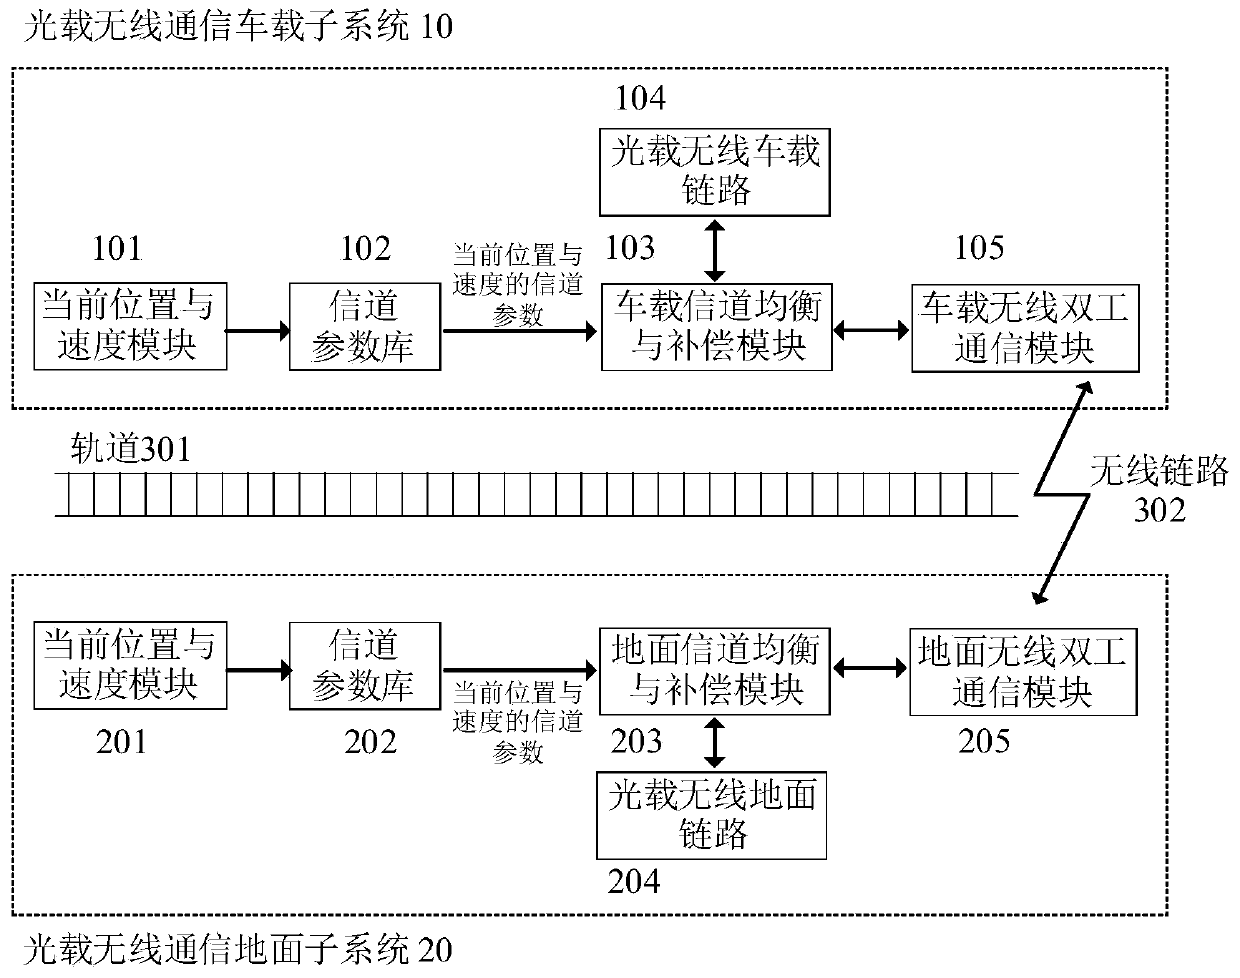 High-speed railway radio-over-fiber communication system and method based on precise channel parameters